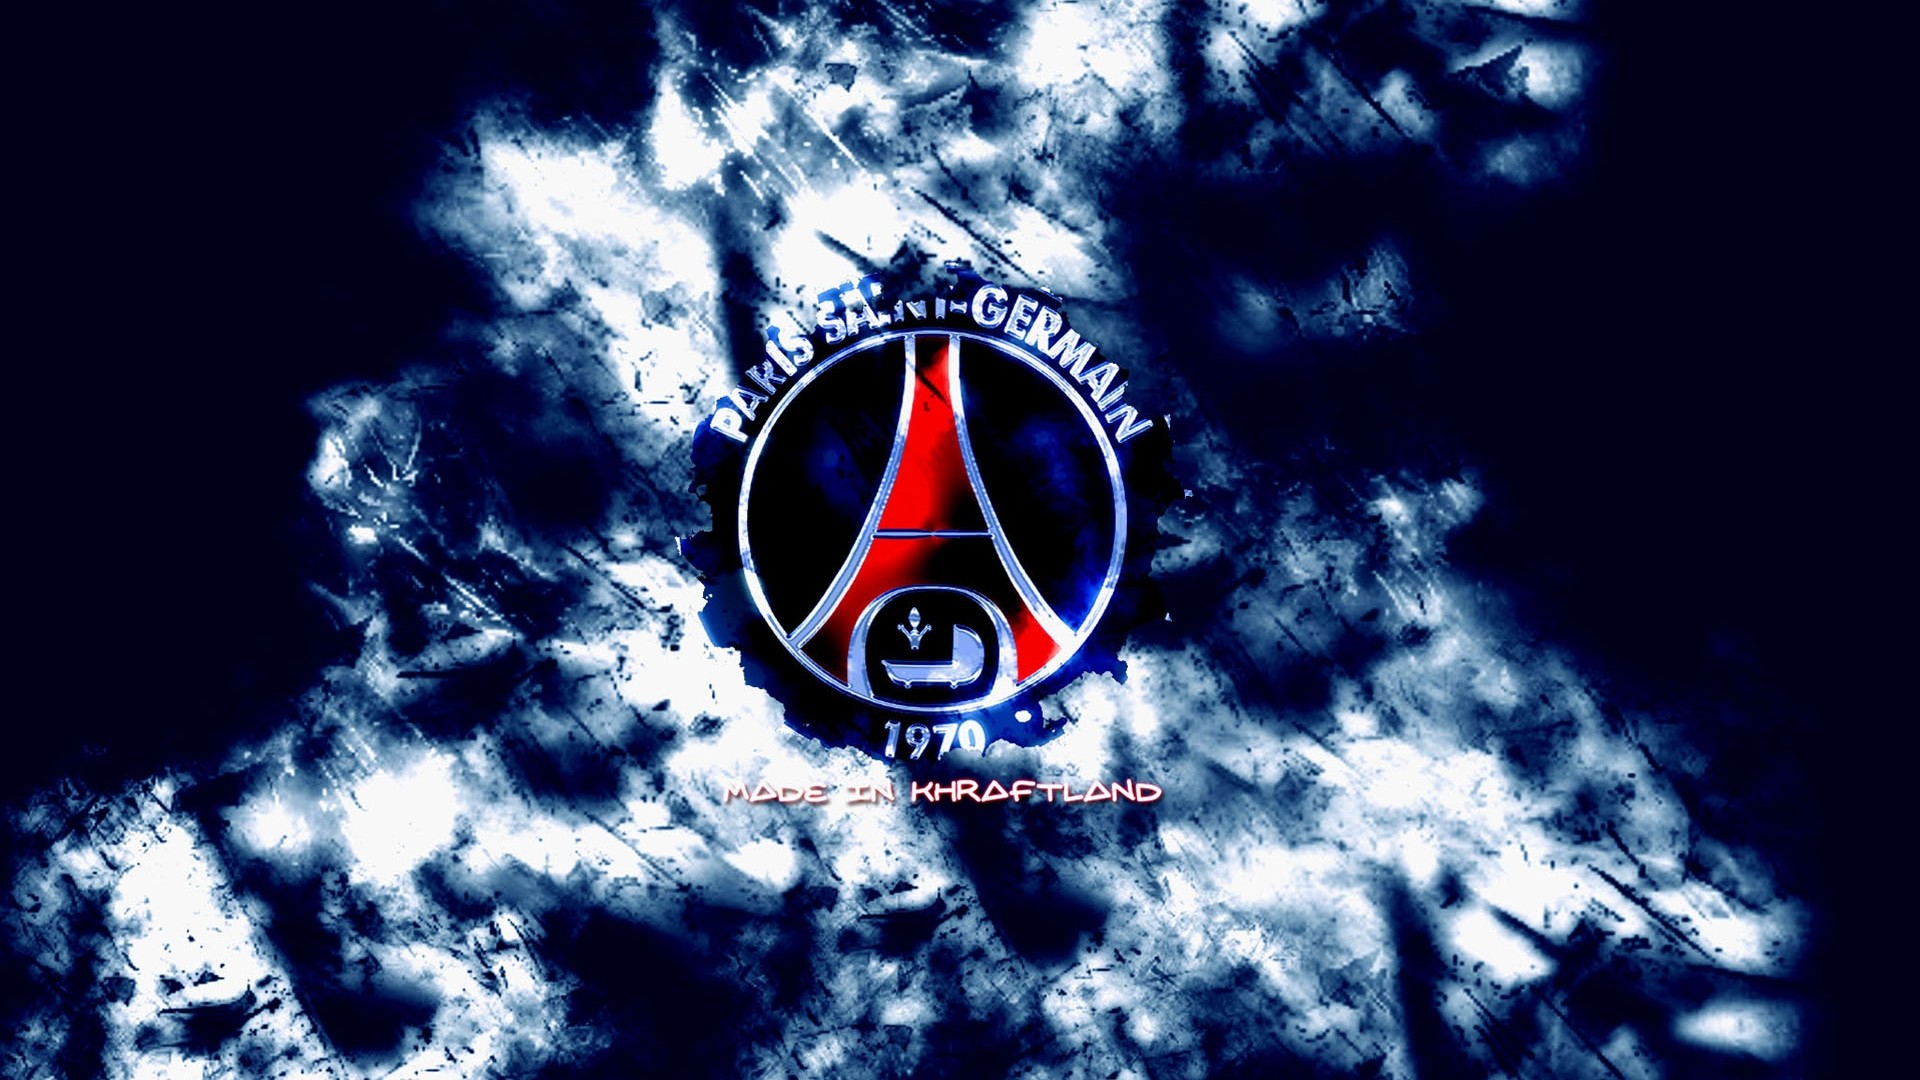 Wallpaper Desktop PSG HD with high-resolution 1920x1080 pixel. You can use this wallpaper for your Desktop Computers, Mac Screensavers, Windows Backgrounds, iPhone Wallpapers, Tablet or Android Lock screen and another Mobile device